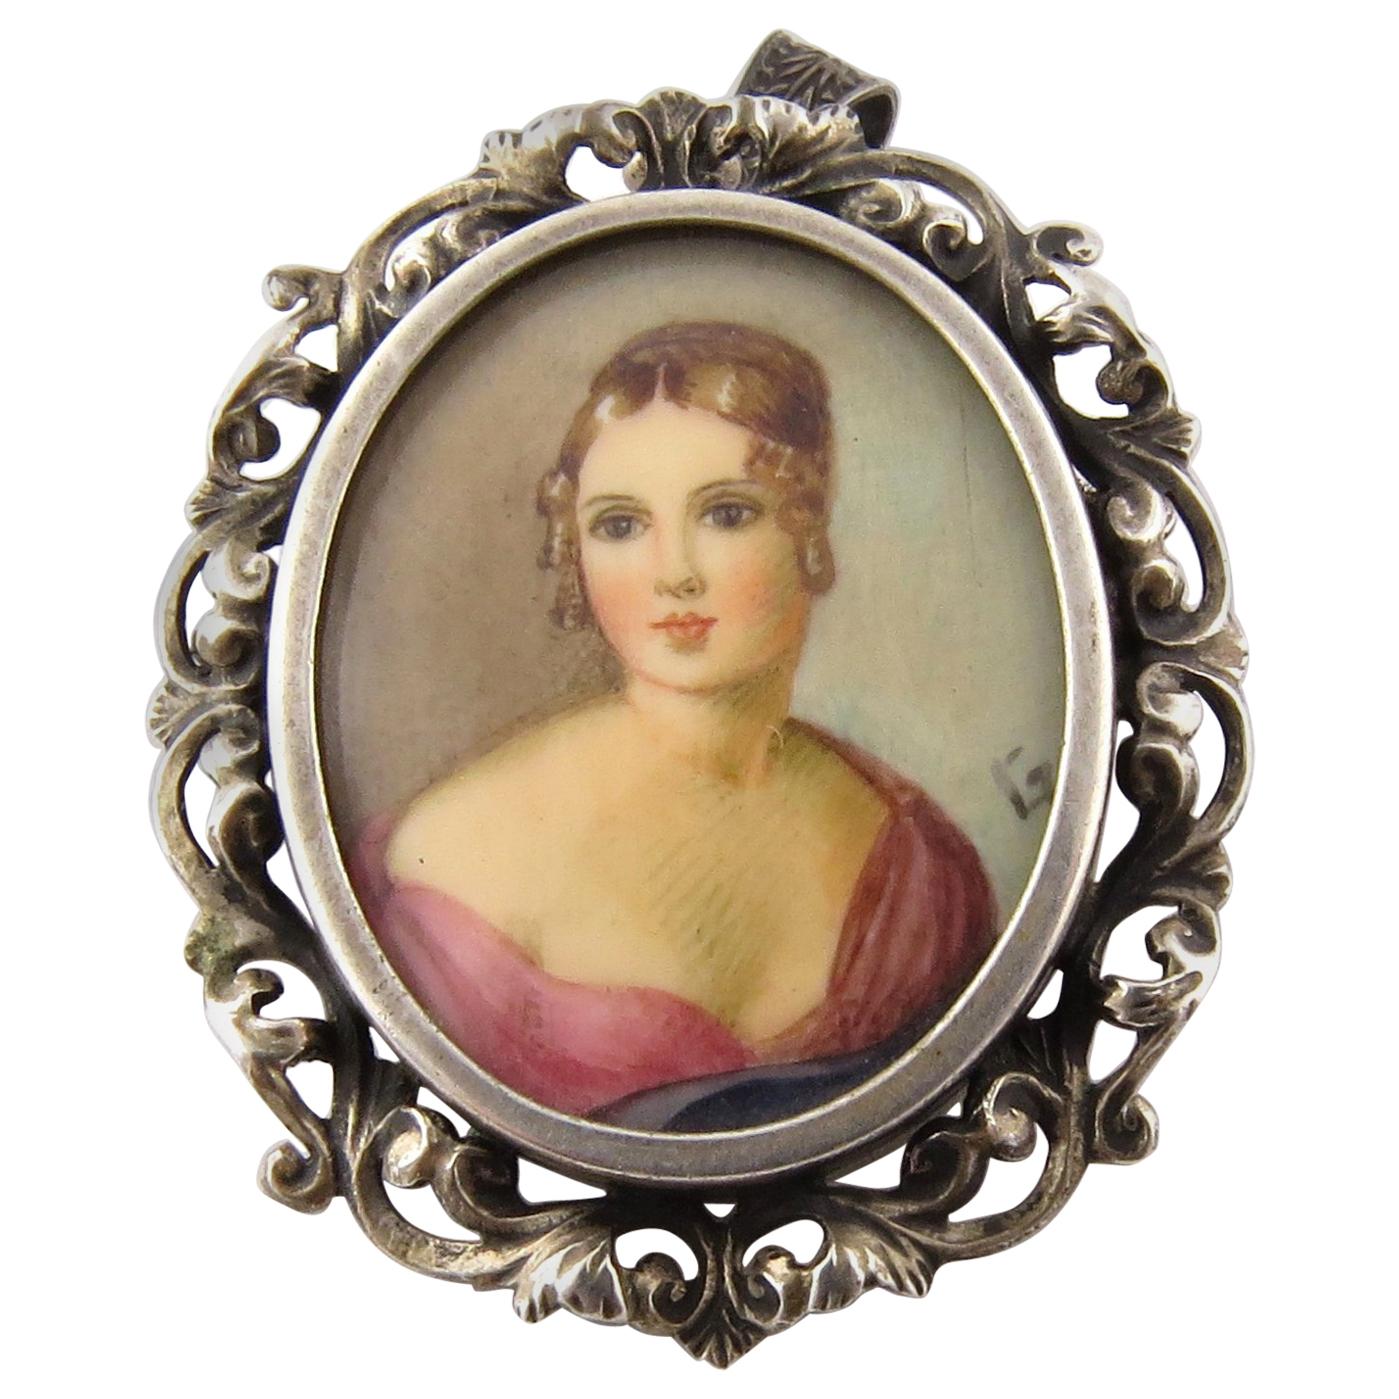 800 Silver Hand-Painted Portrait Brooch or Pendant